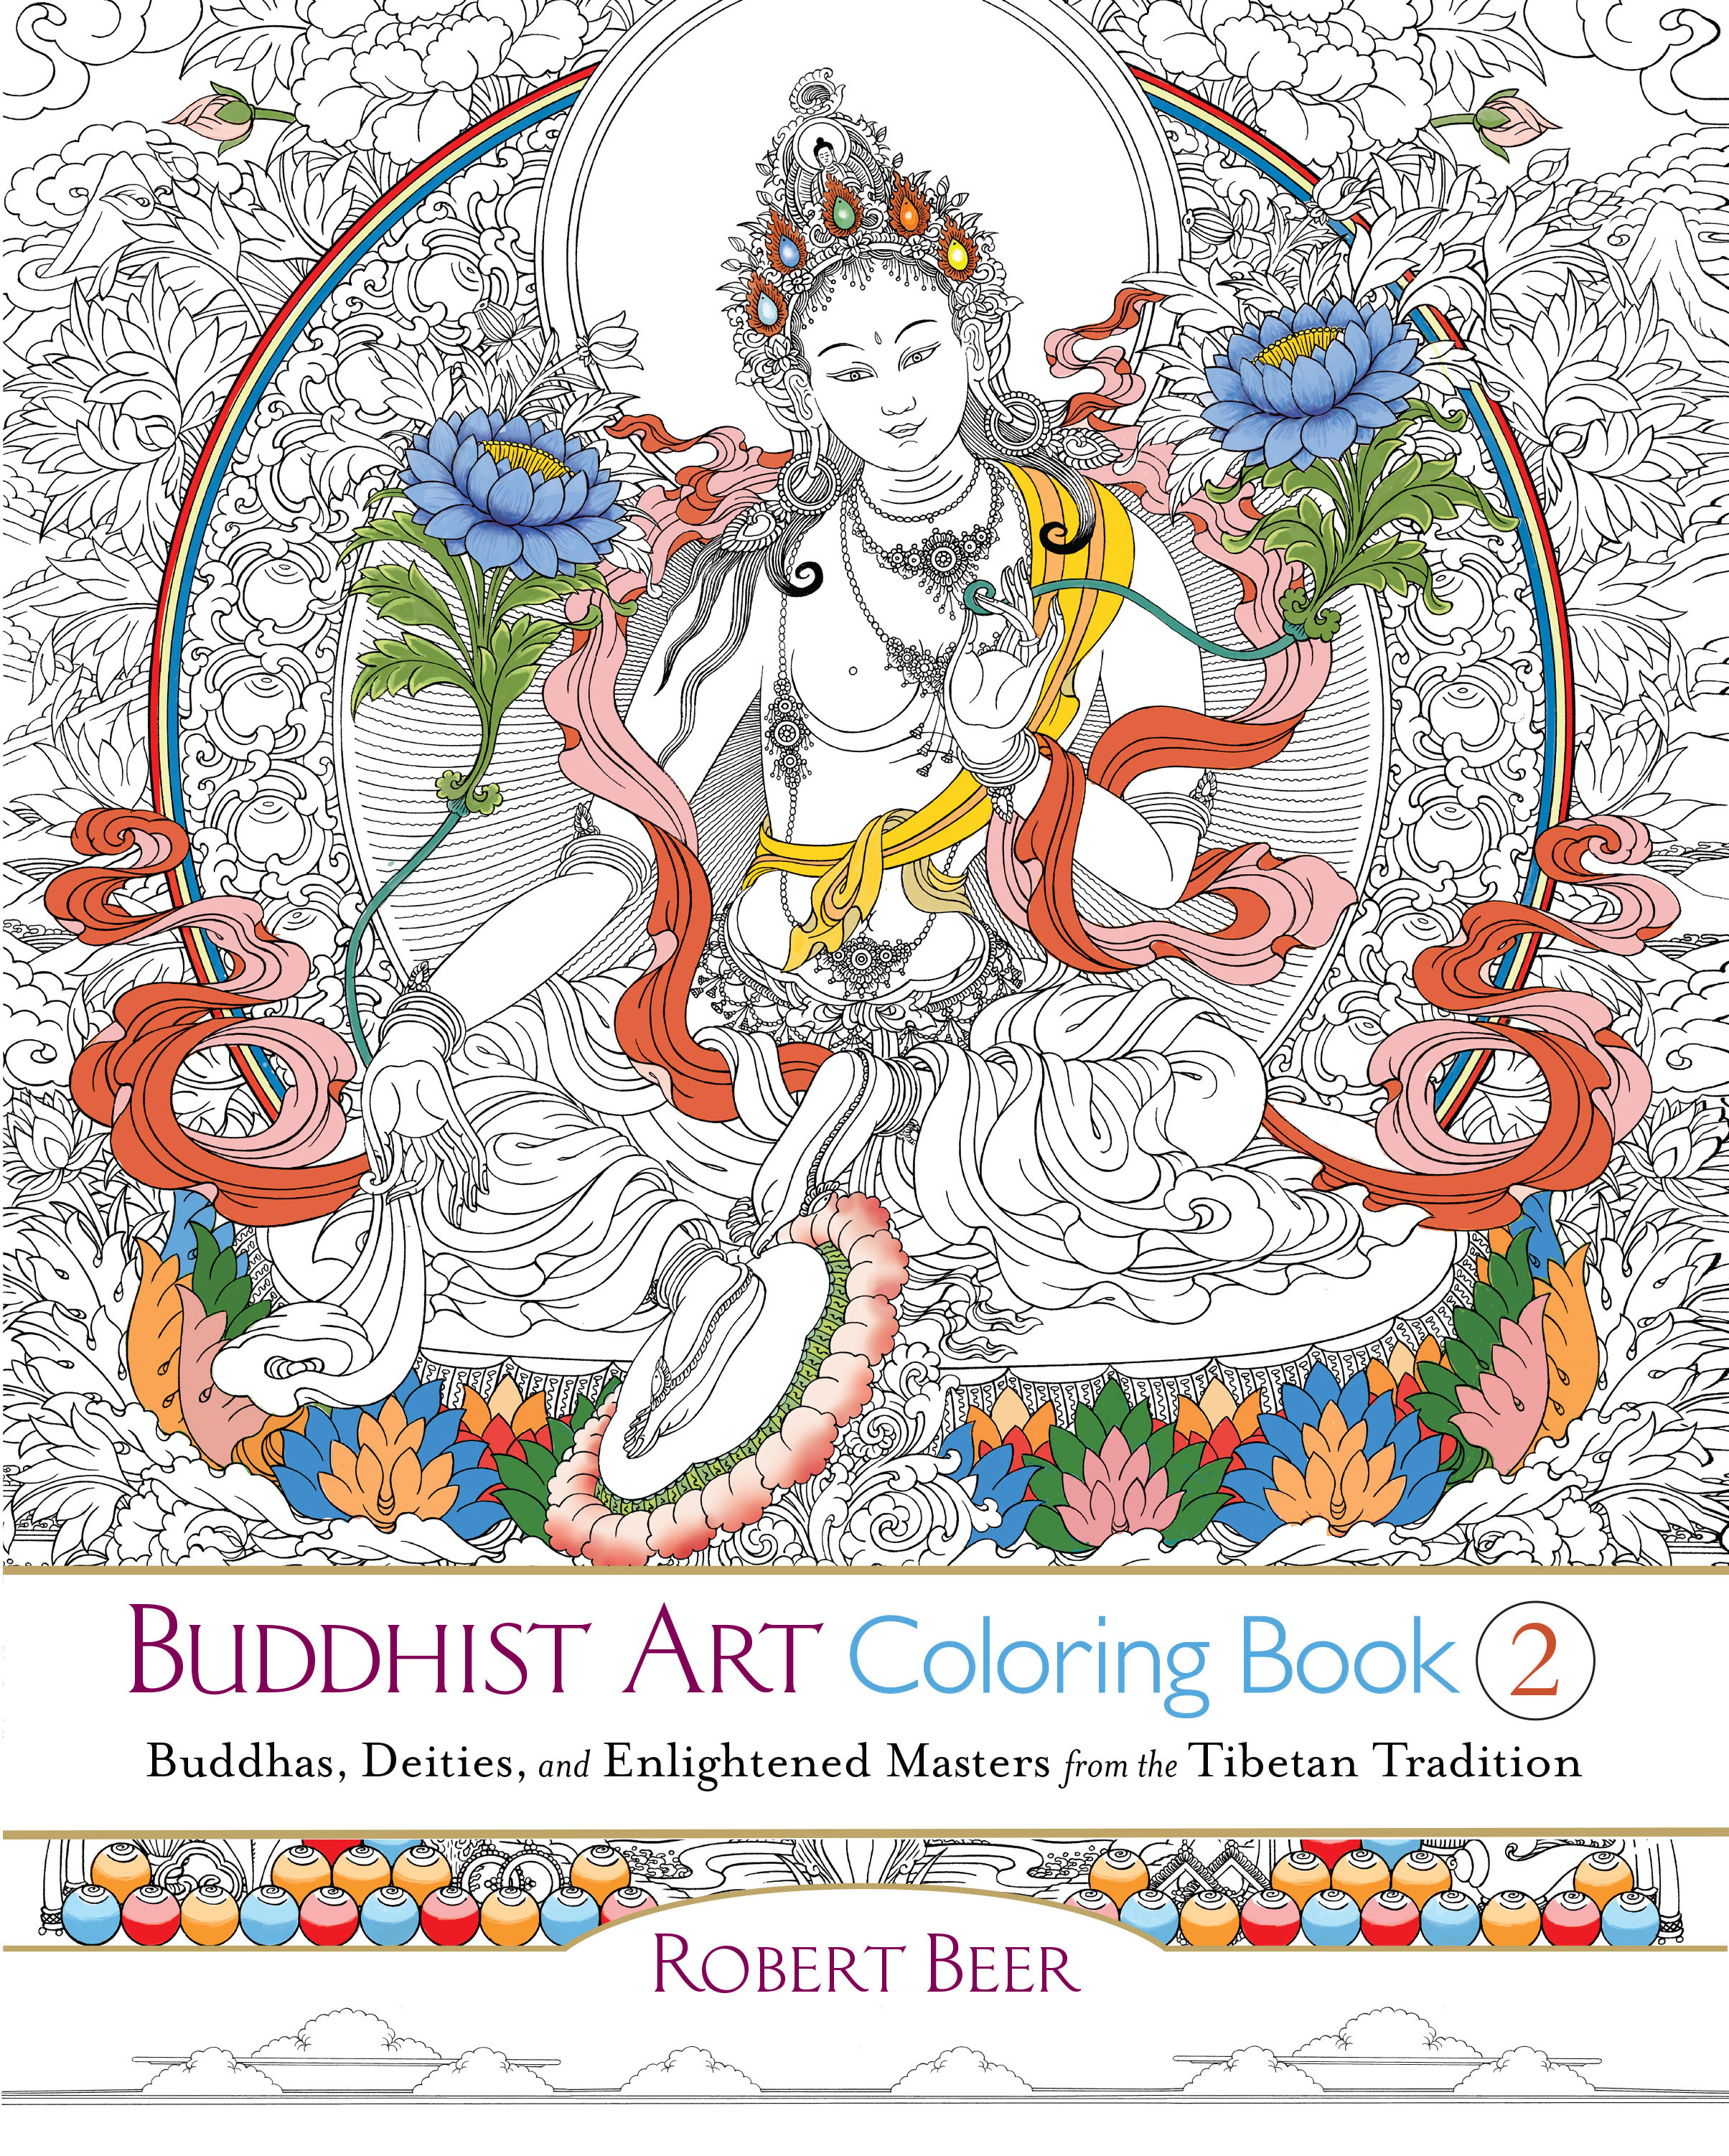 From Buddhist Art Coloring Book 2 by Robert Beer, © 2016 by Robert Beer. Reprinted by arrangement with Shambhala Publications, Inc. Boulder, CO. www.shambhala.com